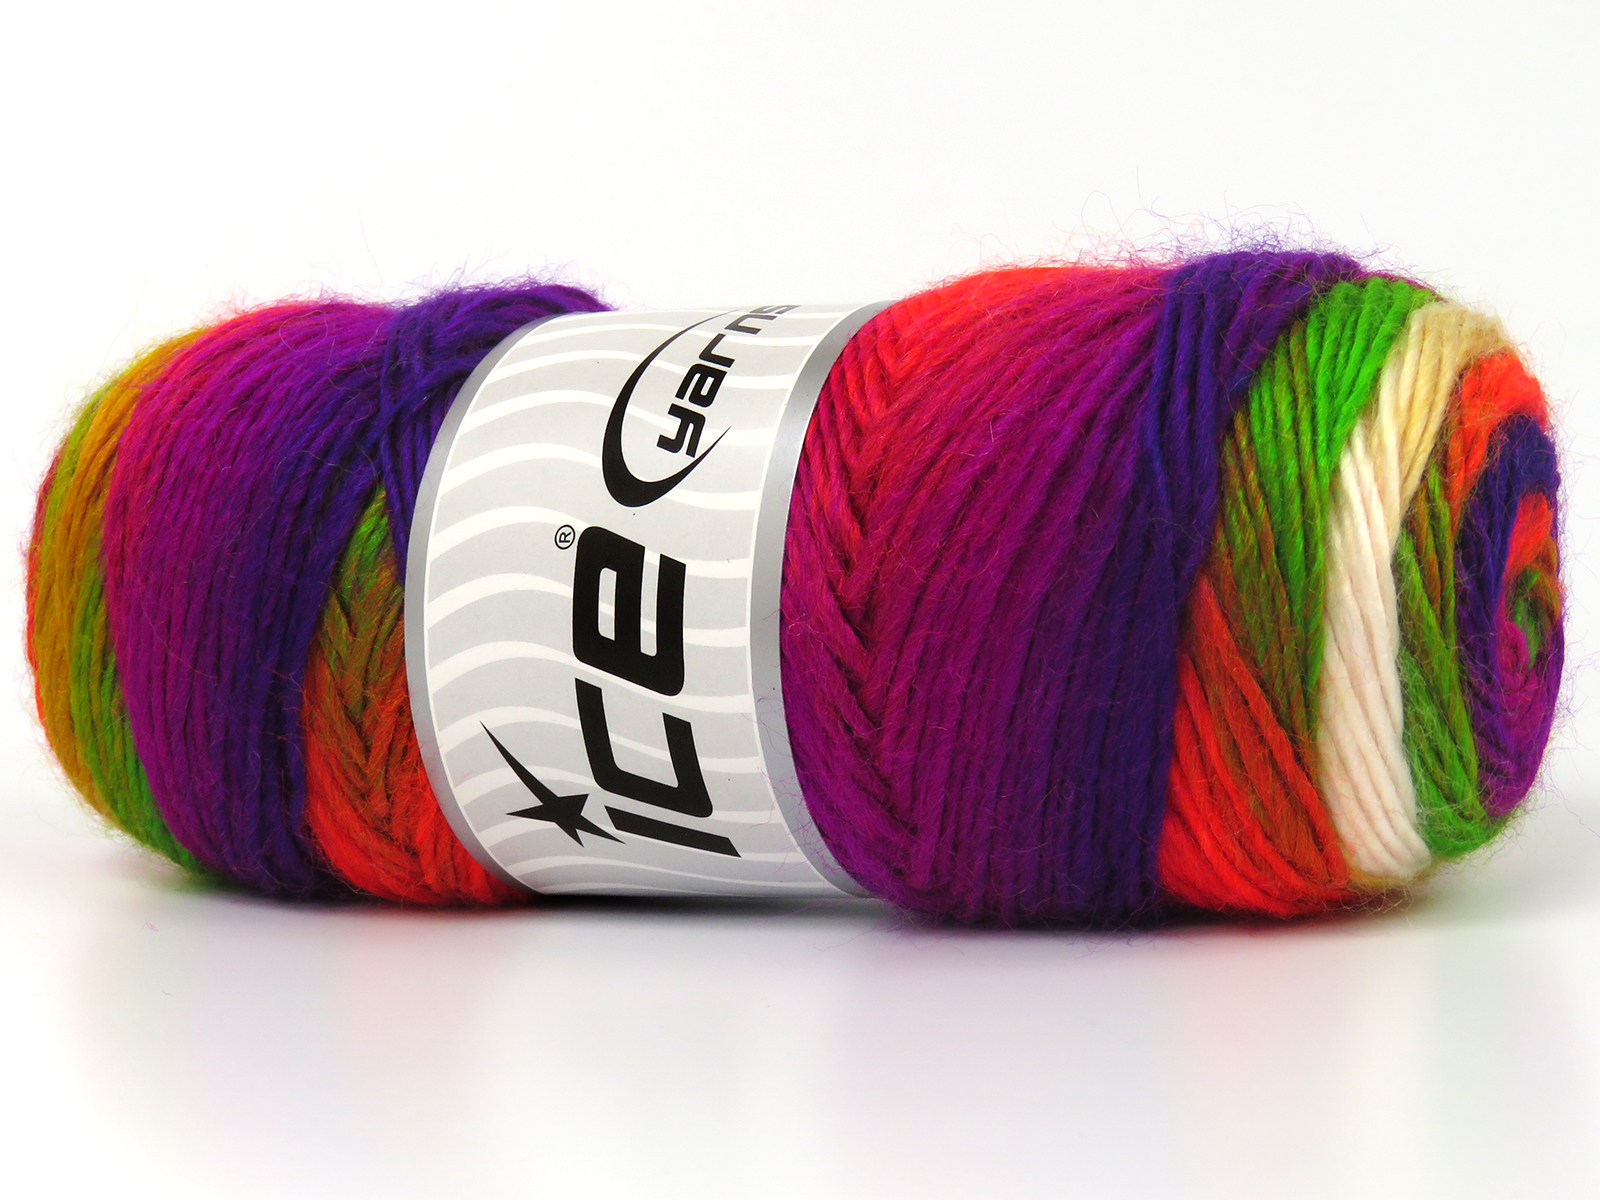 Premium Photo  Balls of multicolored yarn, great designs for any